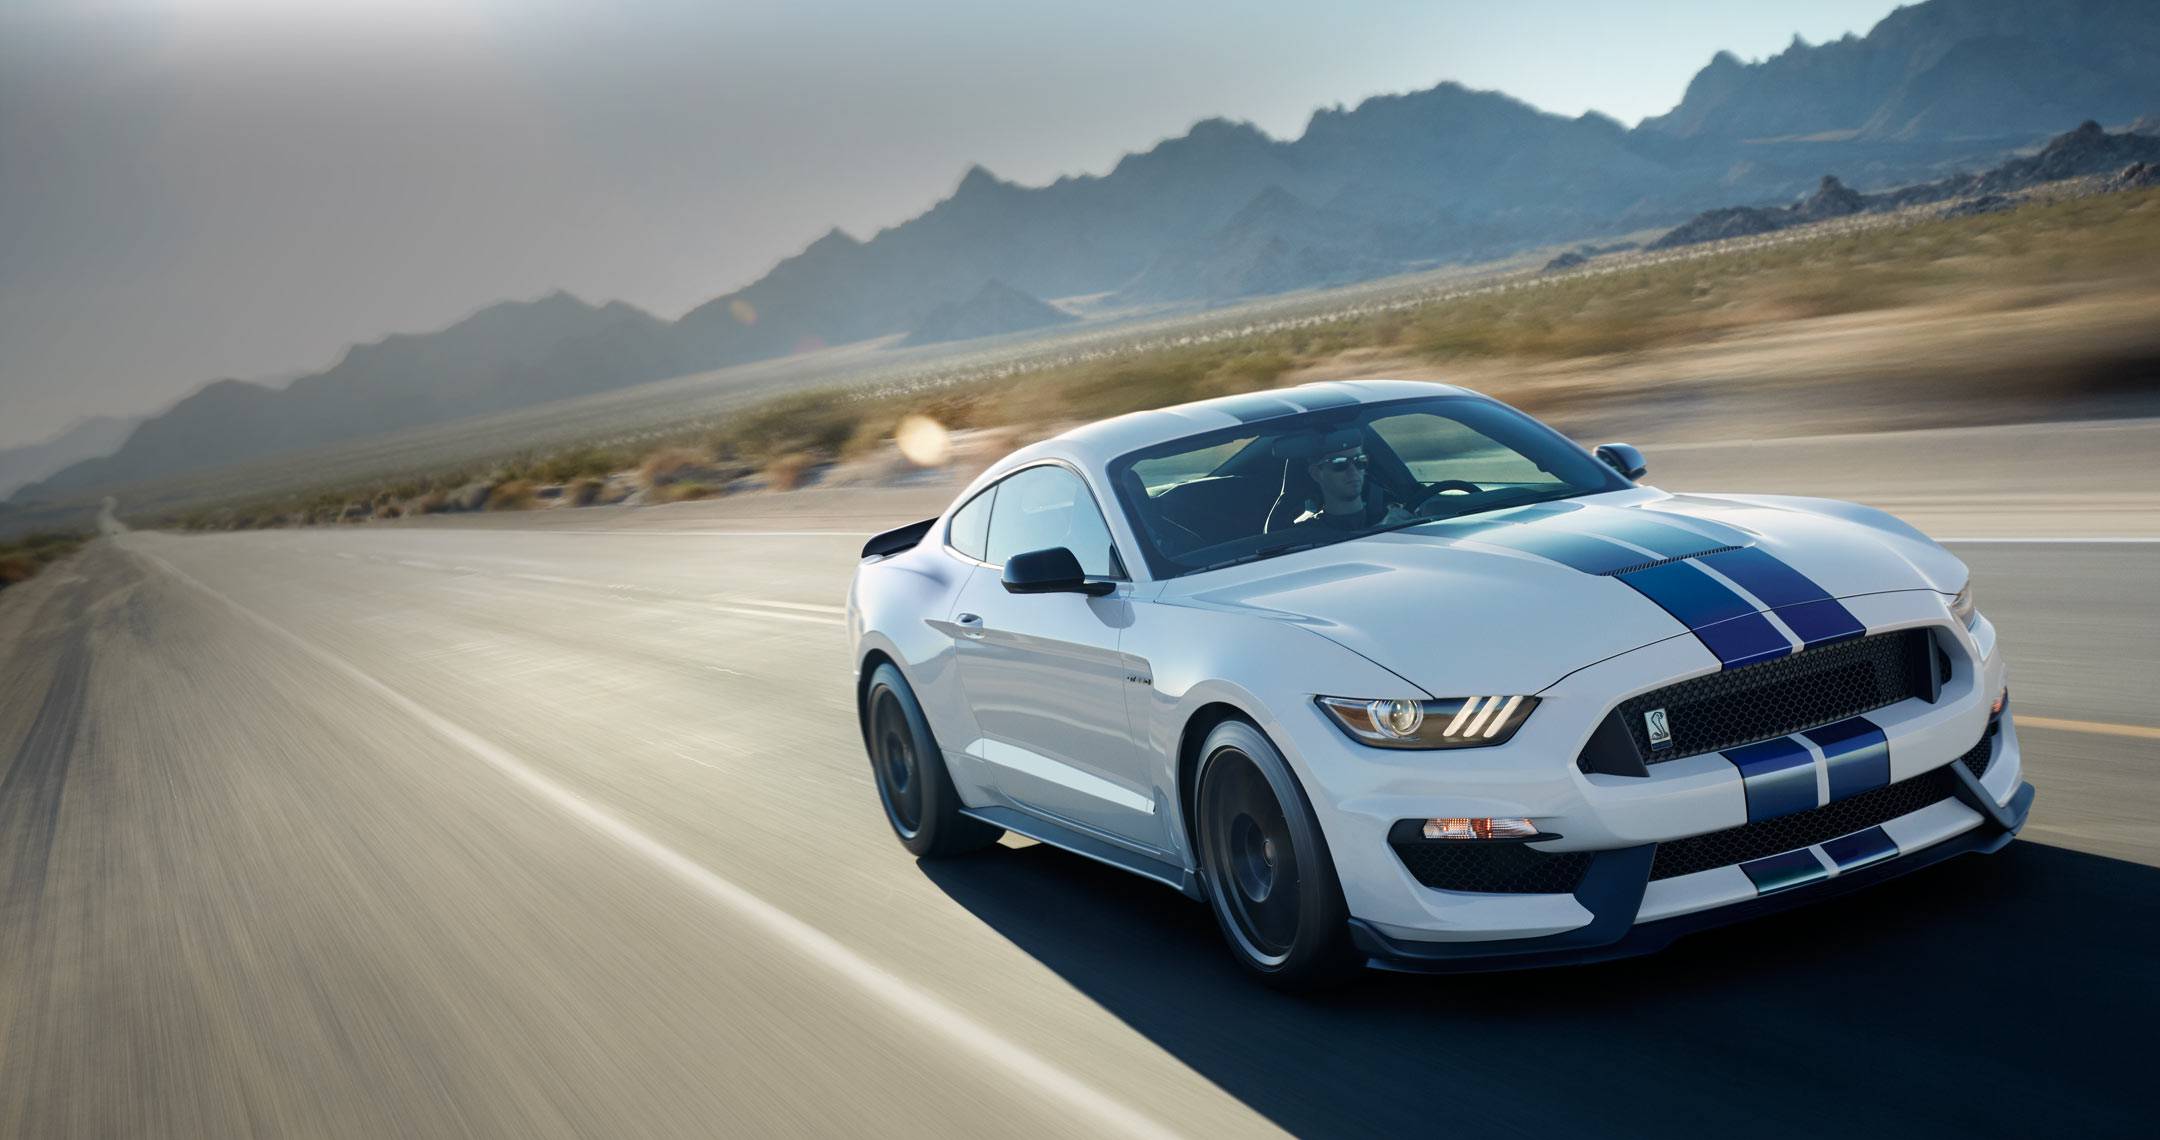 Ford Mustang Shelby Gt350 Wallpaper Hd